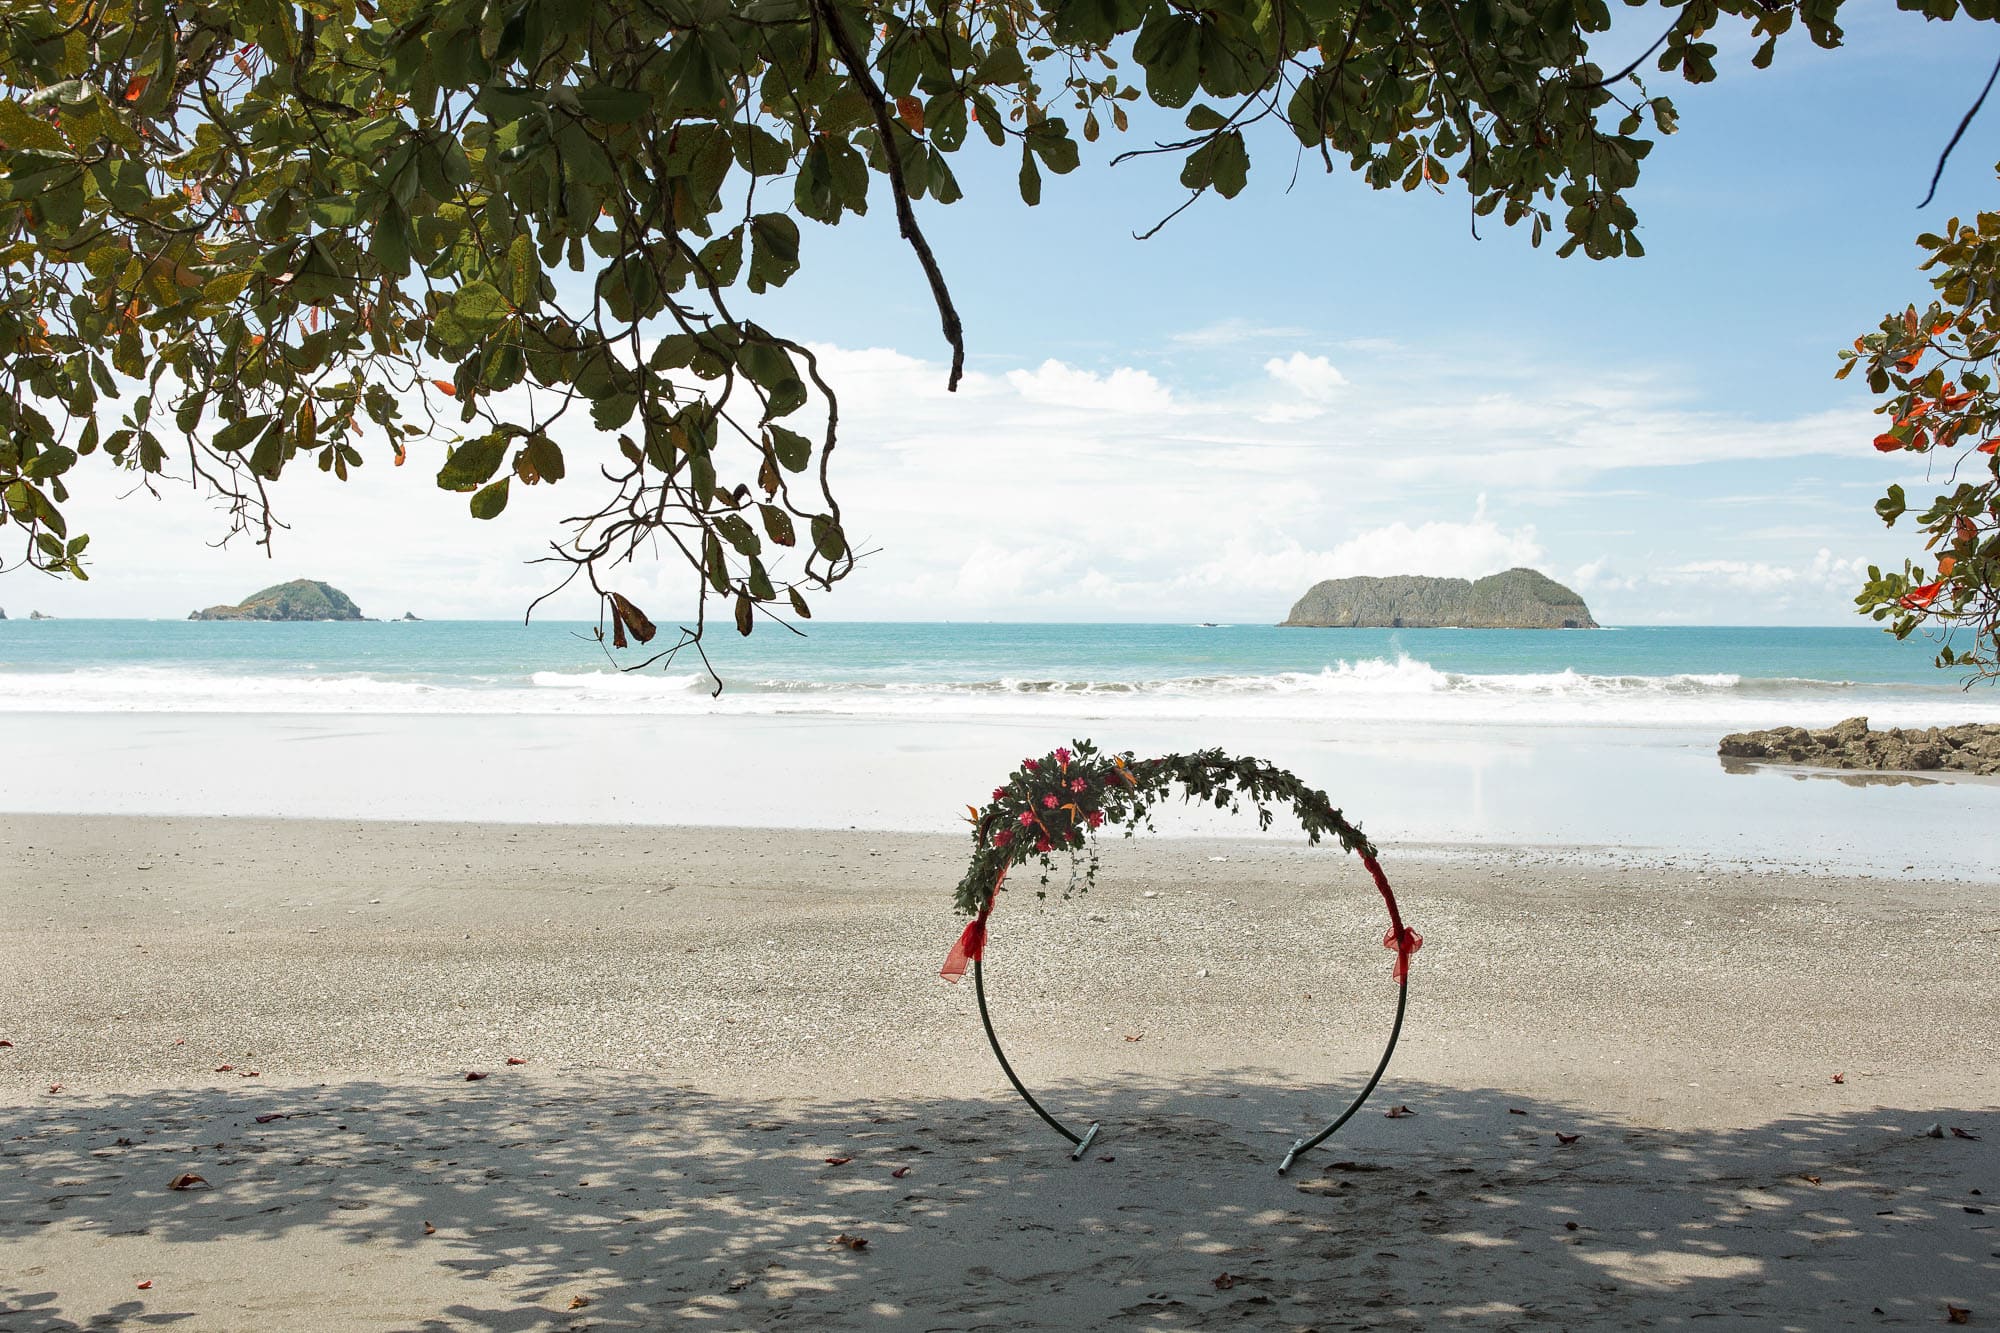 The arbor on the beach for the simple ceremony